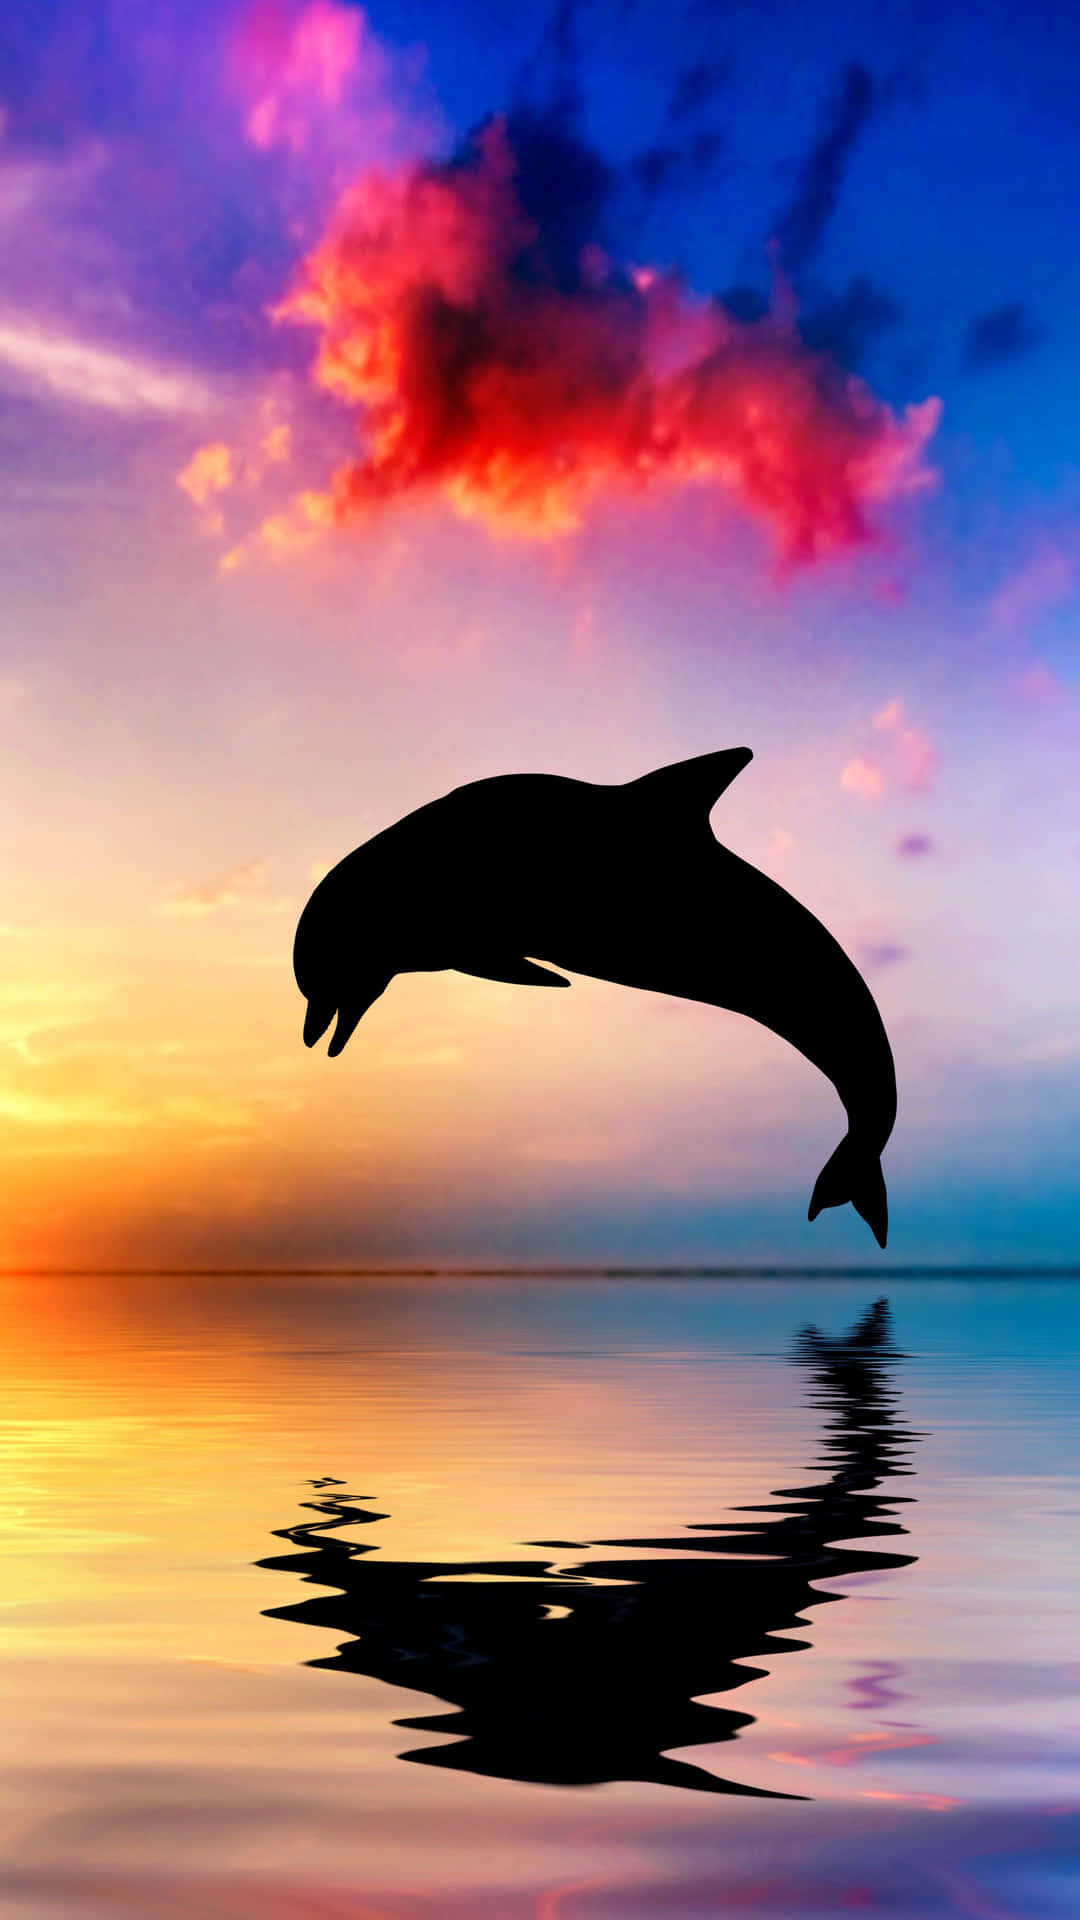 Dolphin Reflection During Sunset Wallpaper